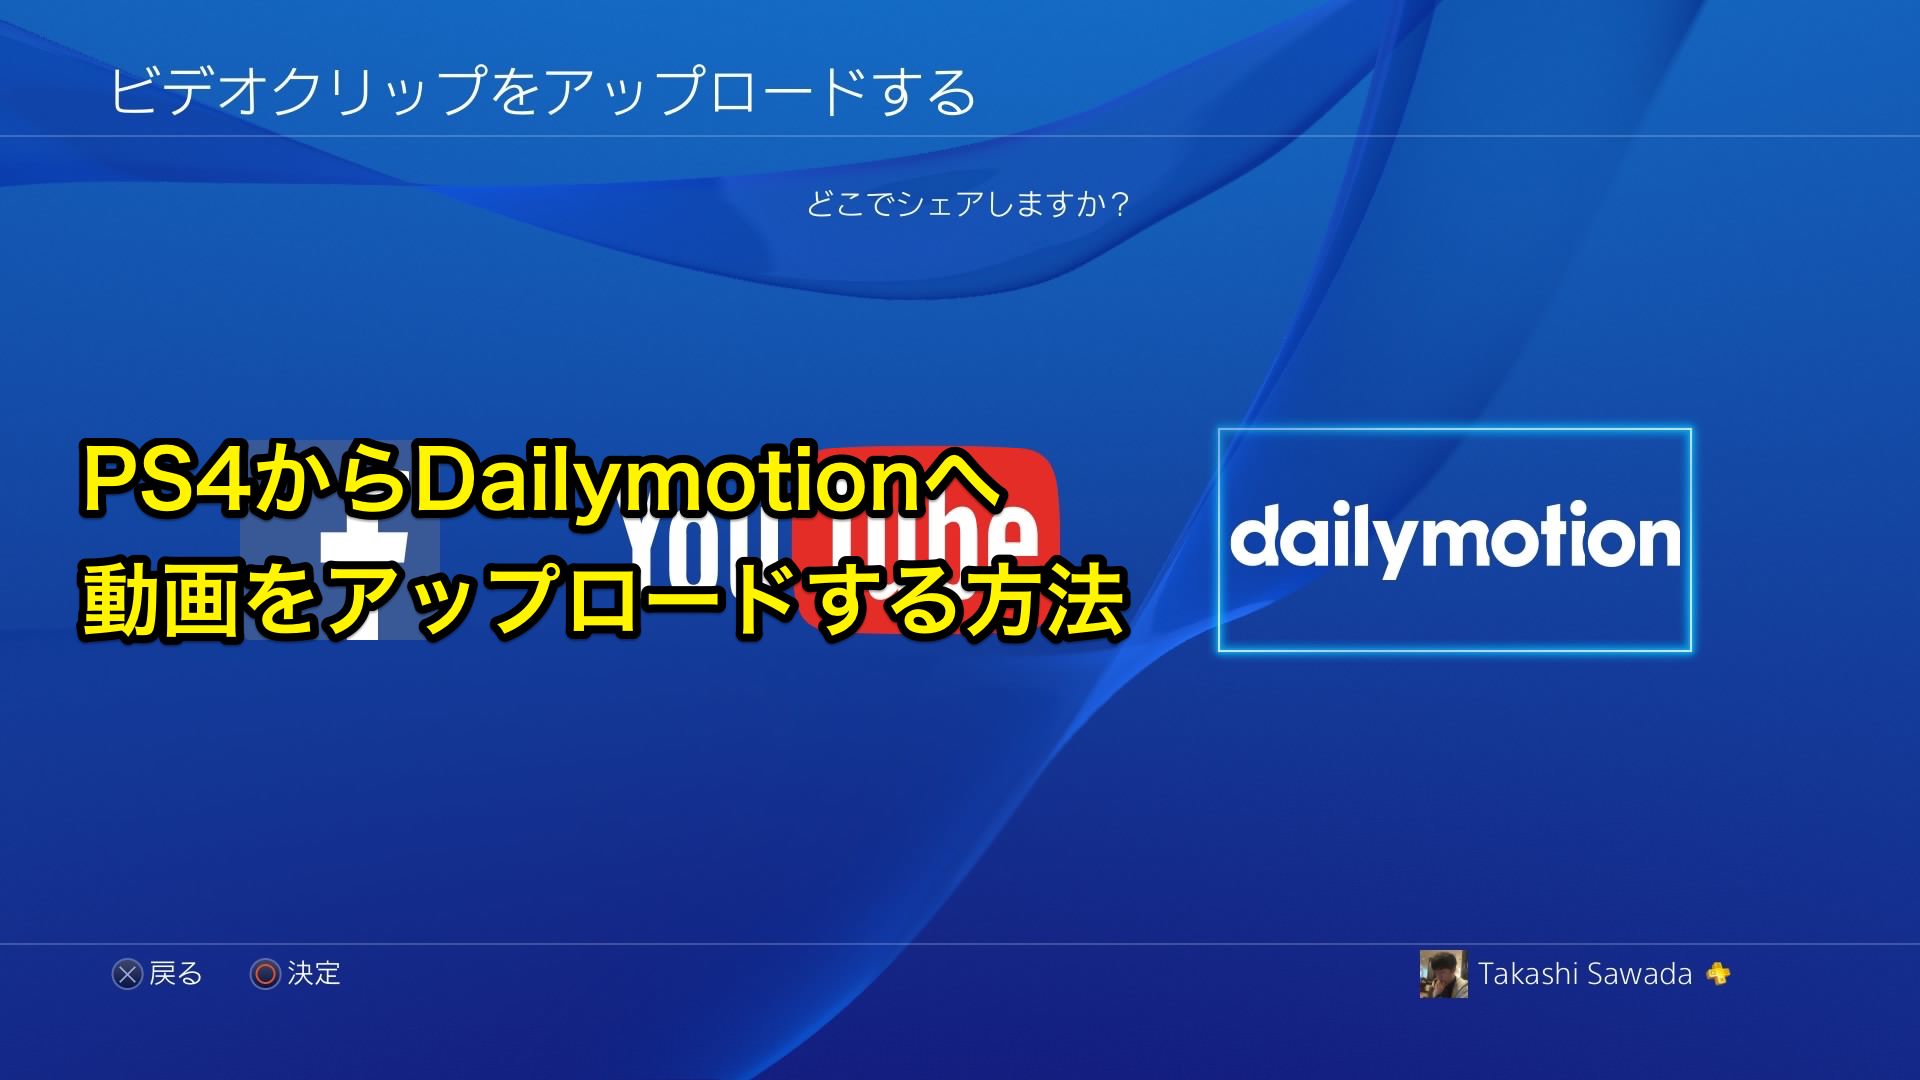 How to upload videos from ps4 to dailymotion 01